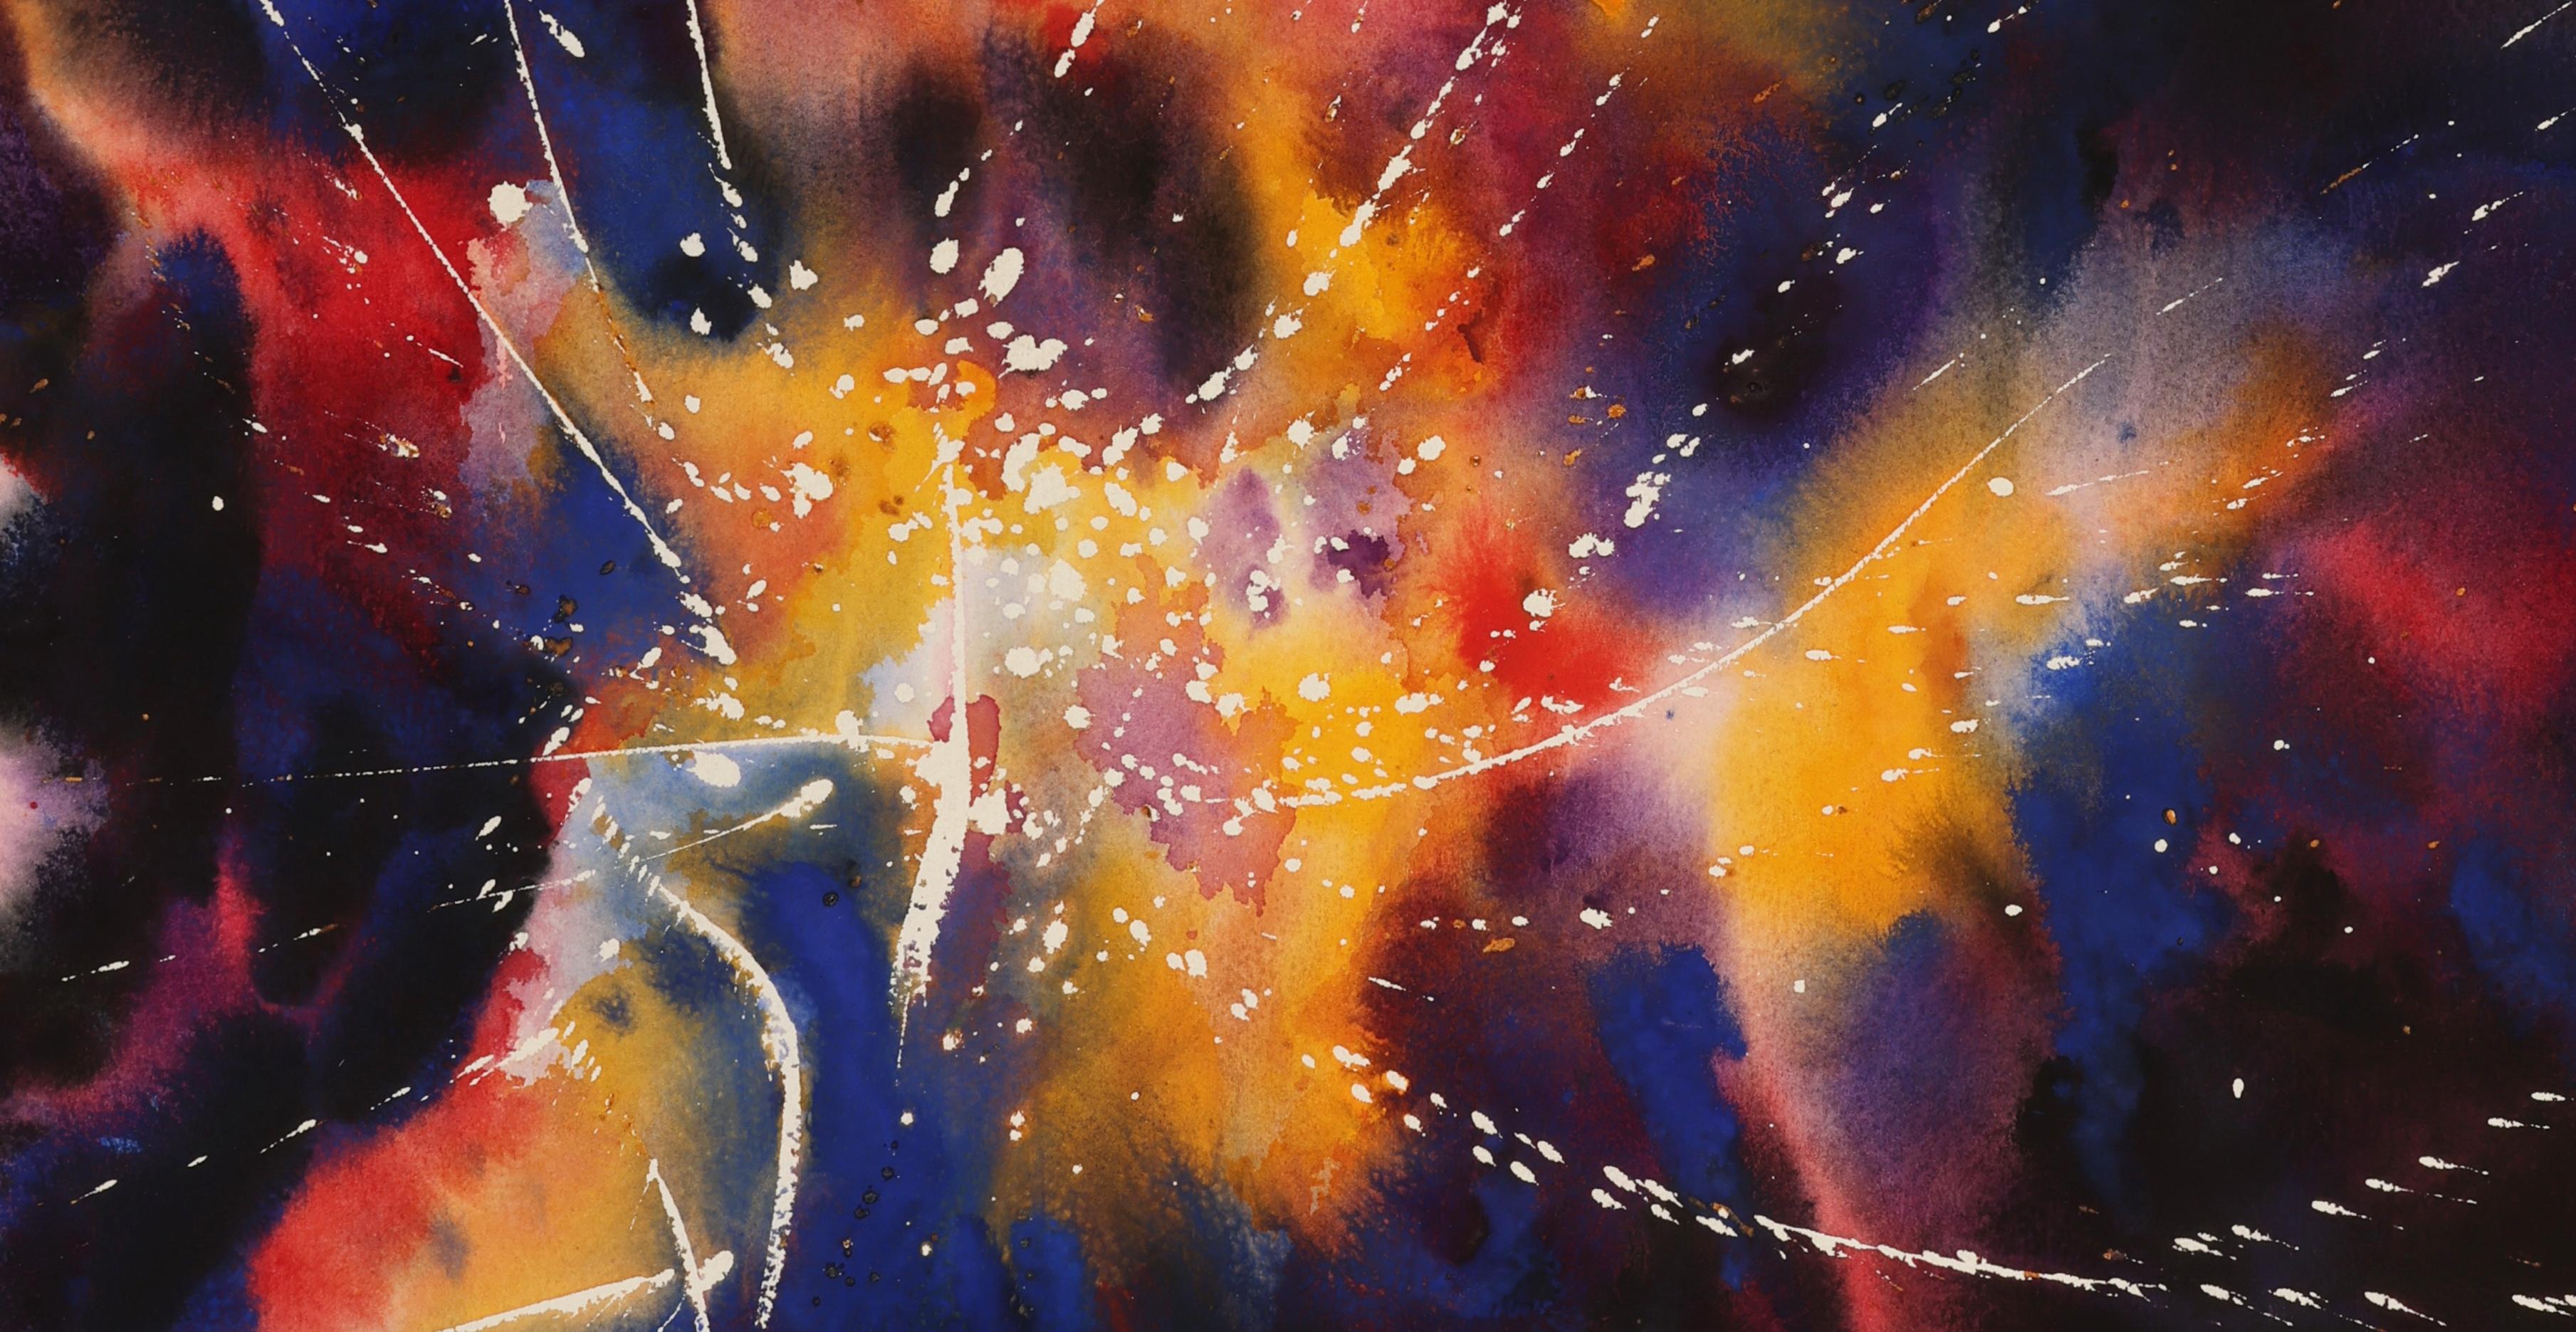 Abstract Watercolor Painting, 'Design for Light', c. 2000 by David Ruth For Sale 2